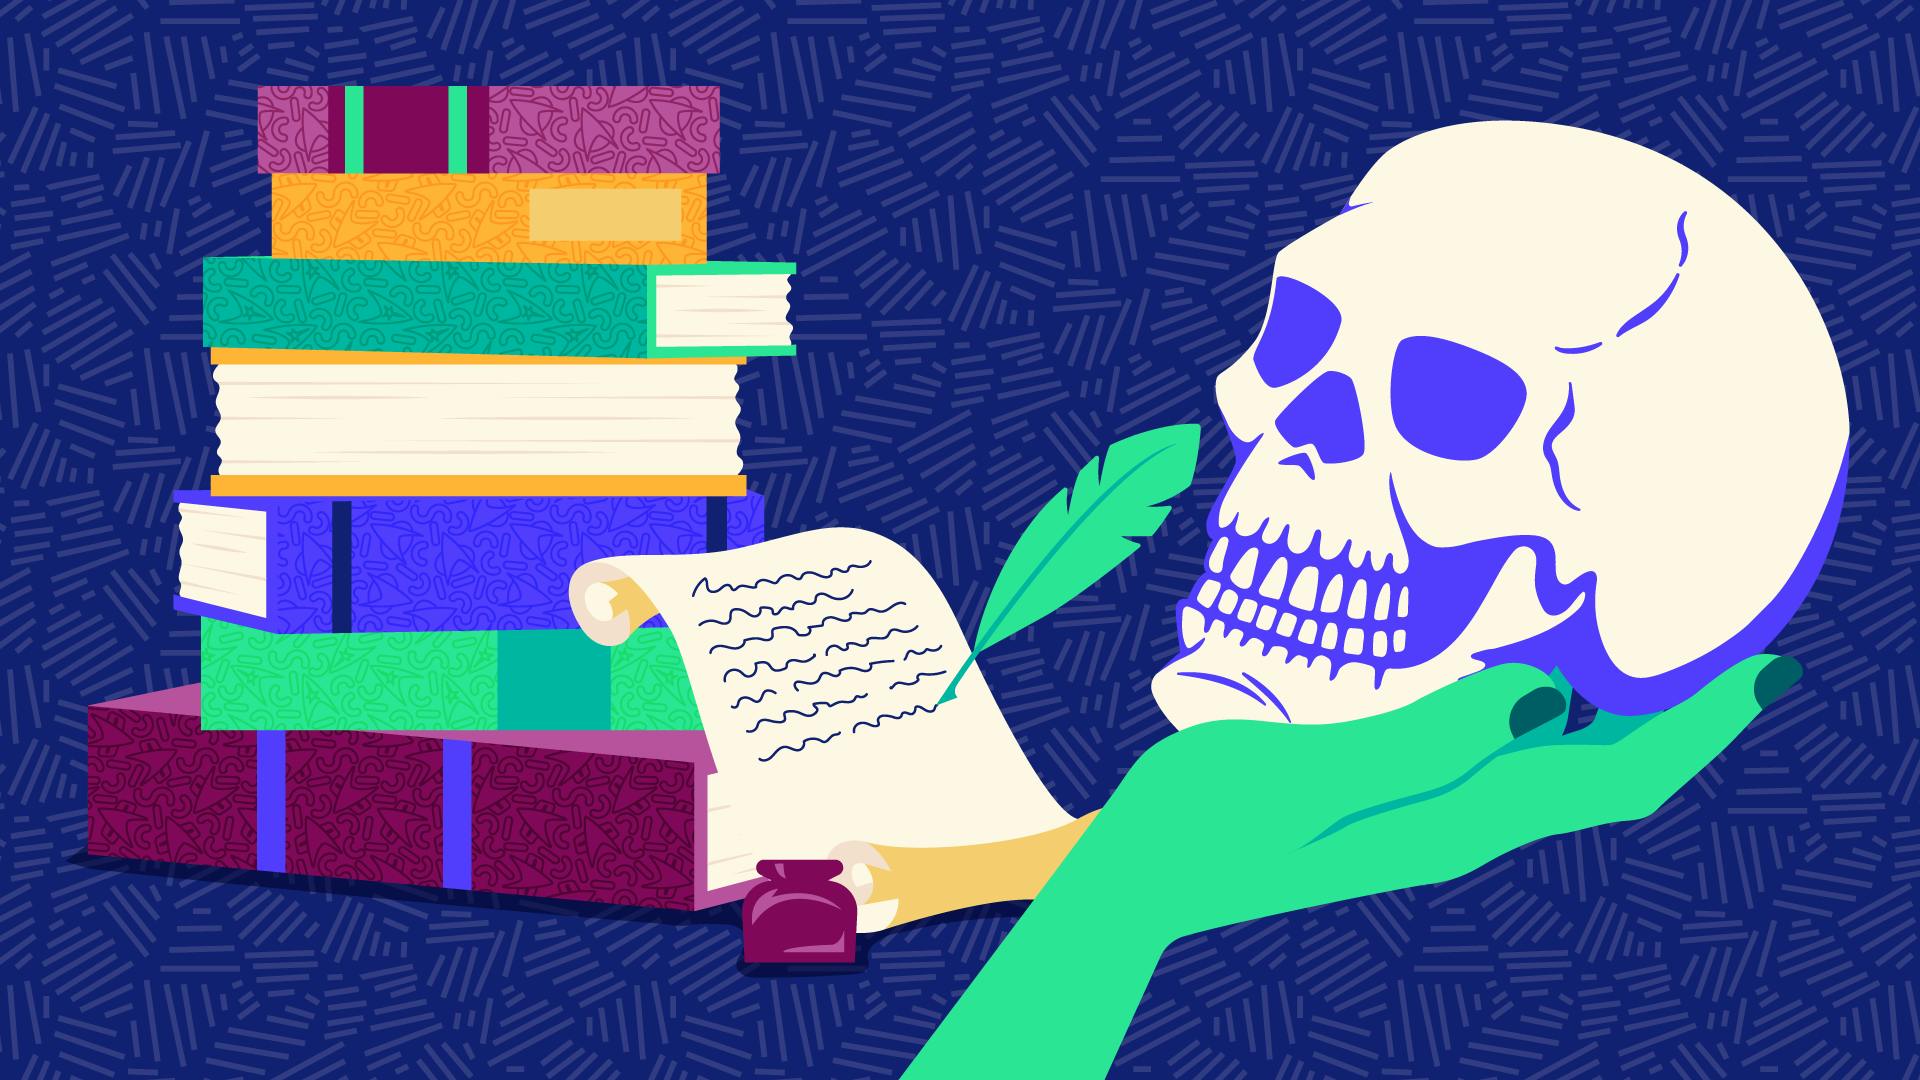 Illustration of a stack of books, a bottle of ink, a quill, parchment, and a hand holding a skull